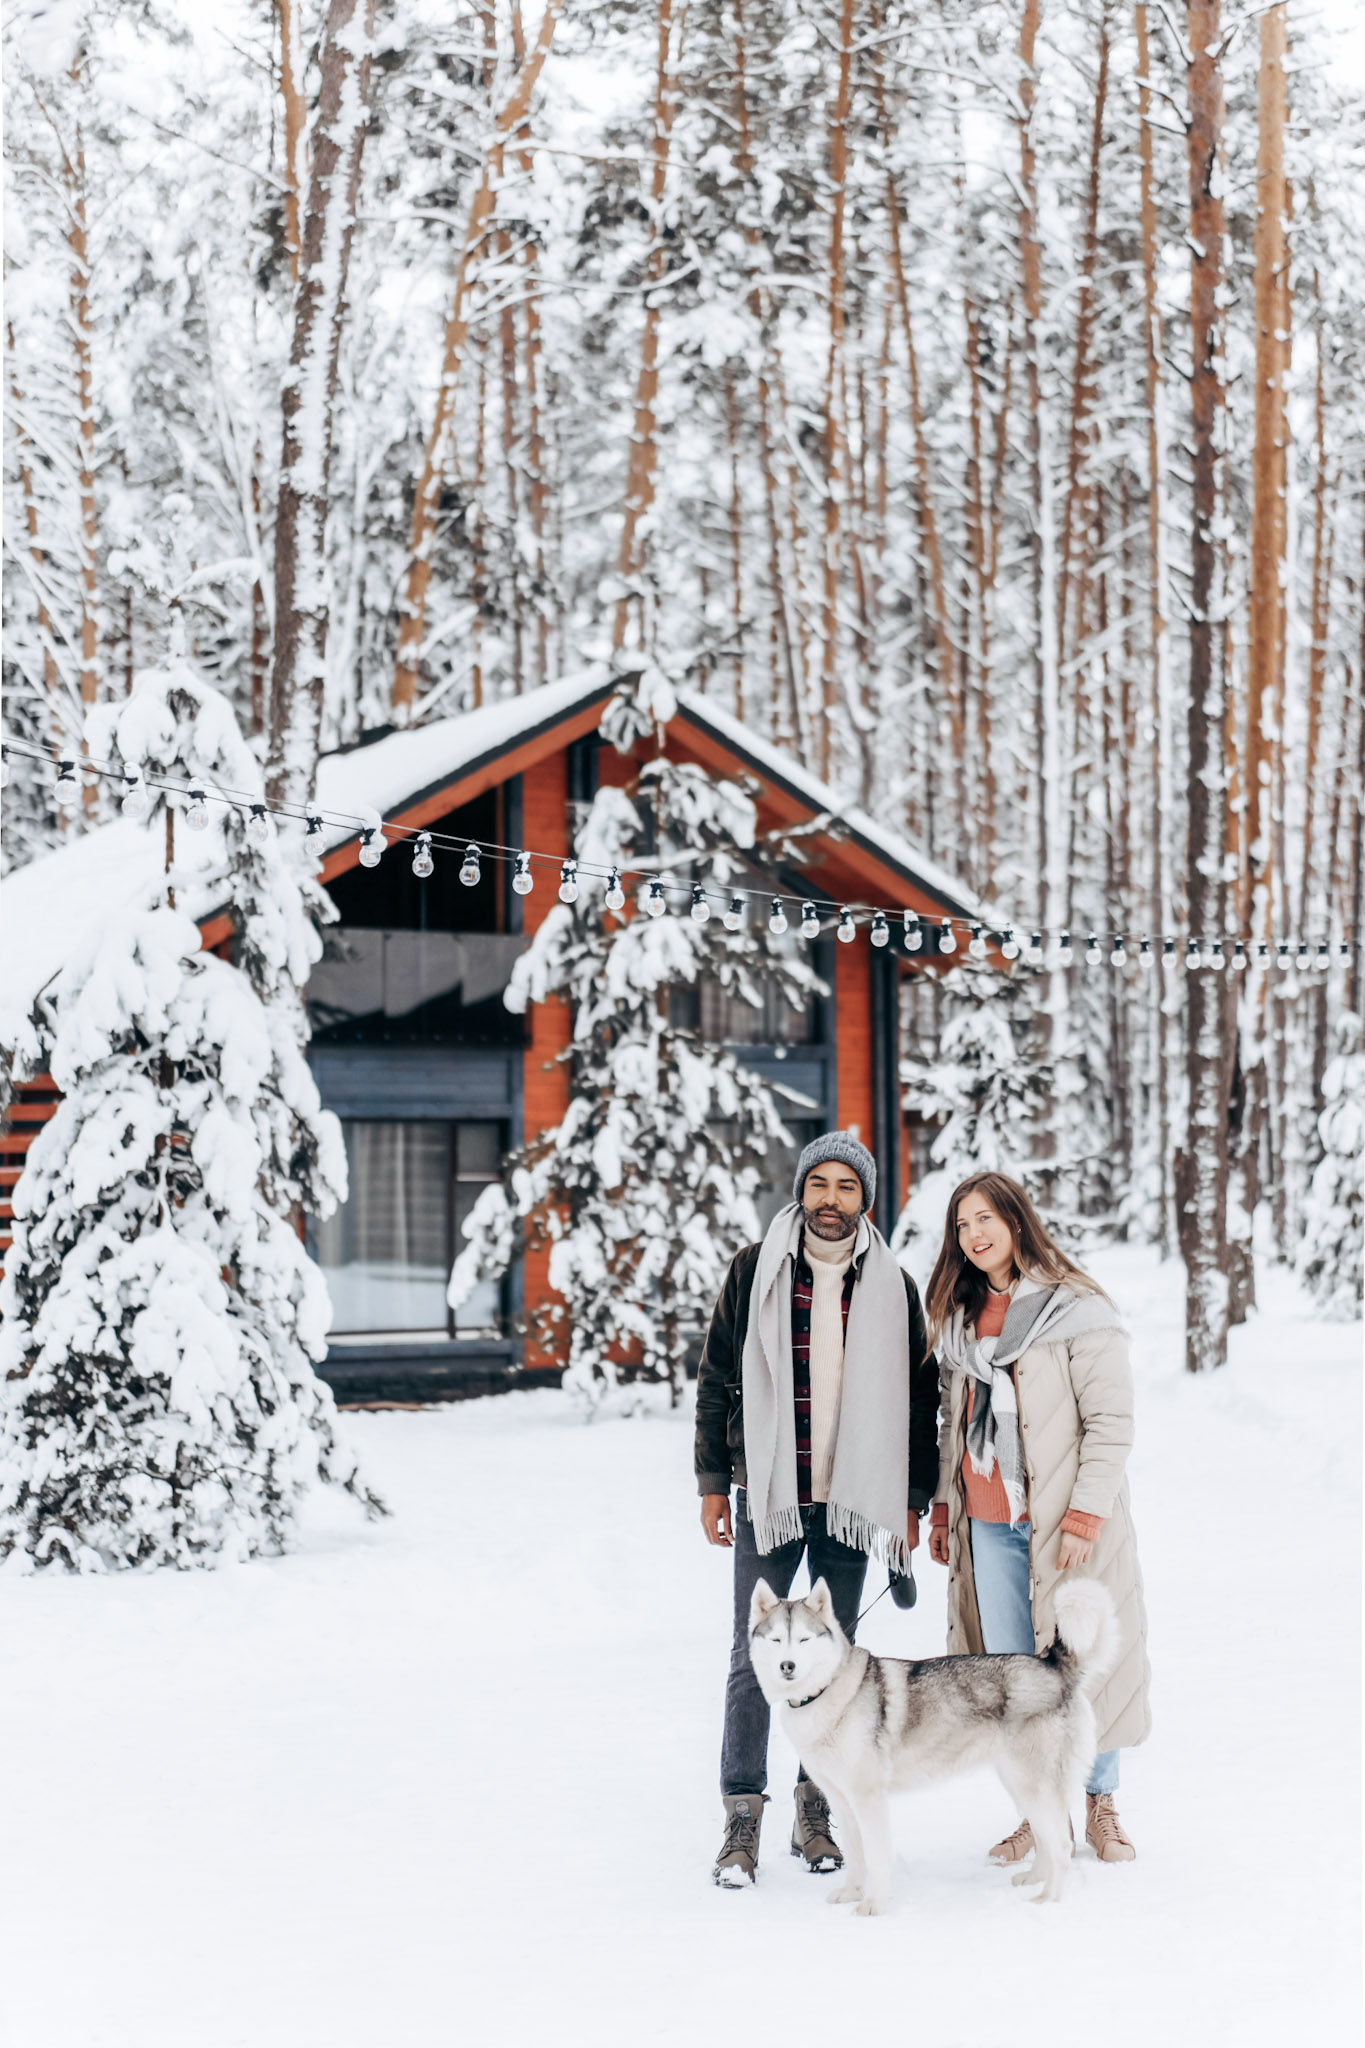 A beautiful home in a forest covered in snow. A couple with a husky are shown. This article covers creative ways to make your backyard fun and functional during the winter.